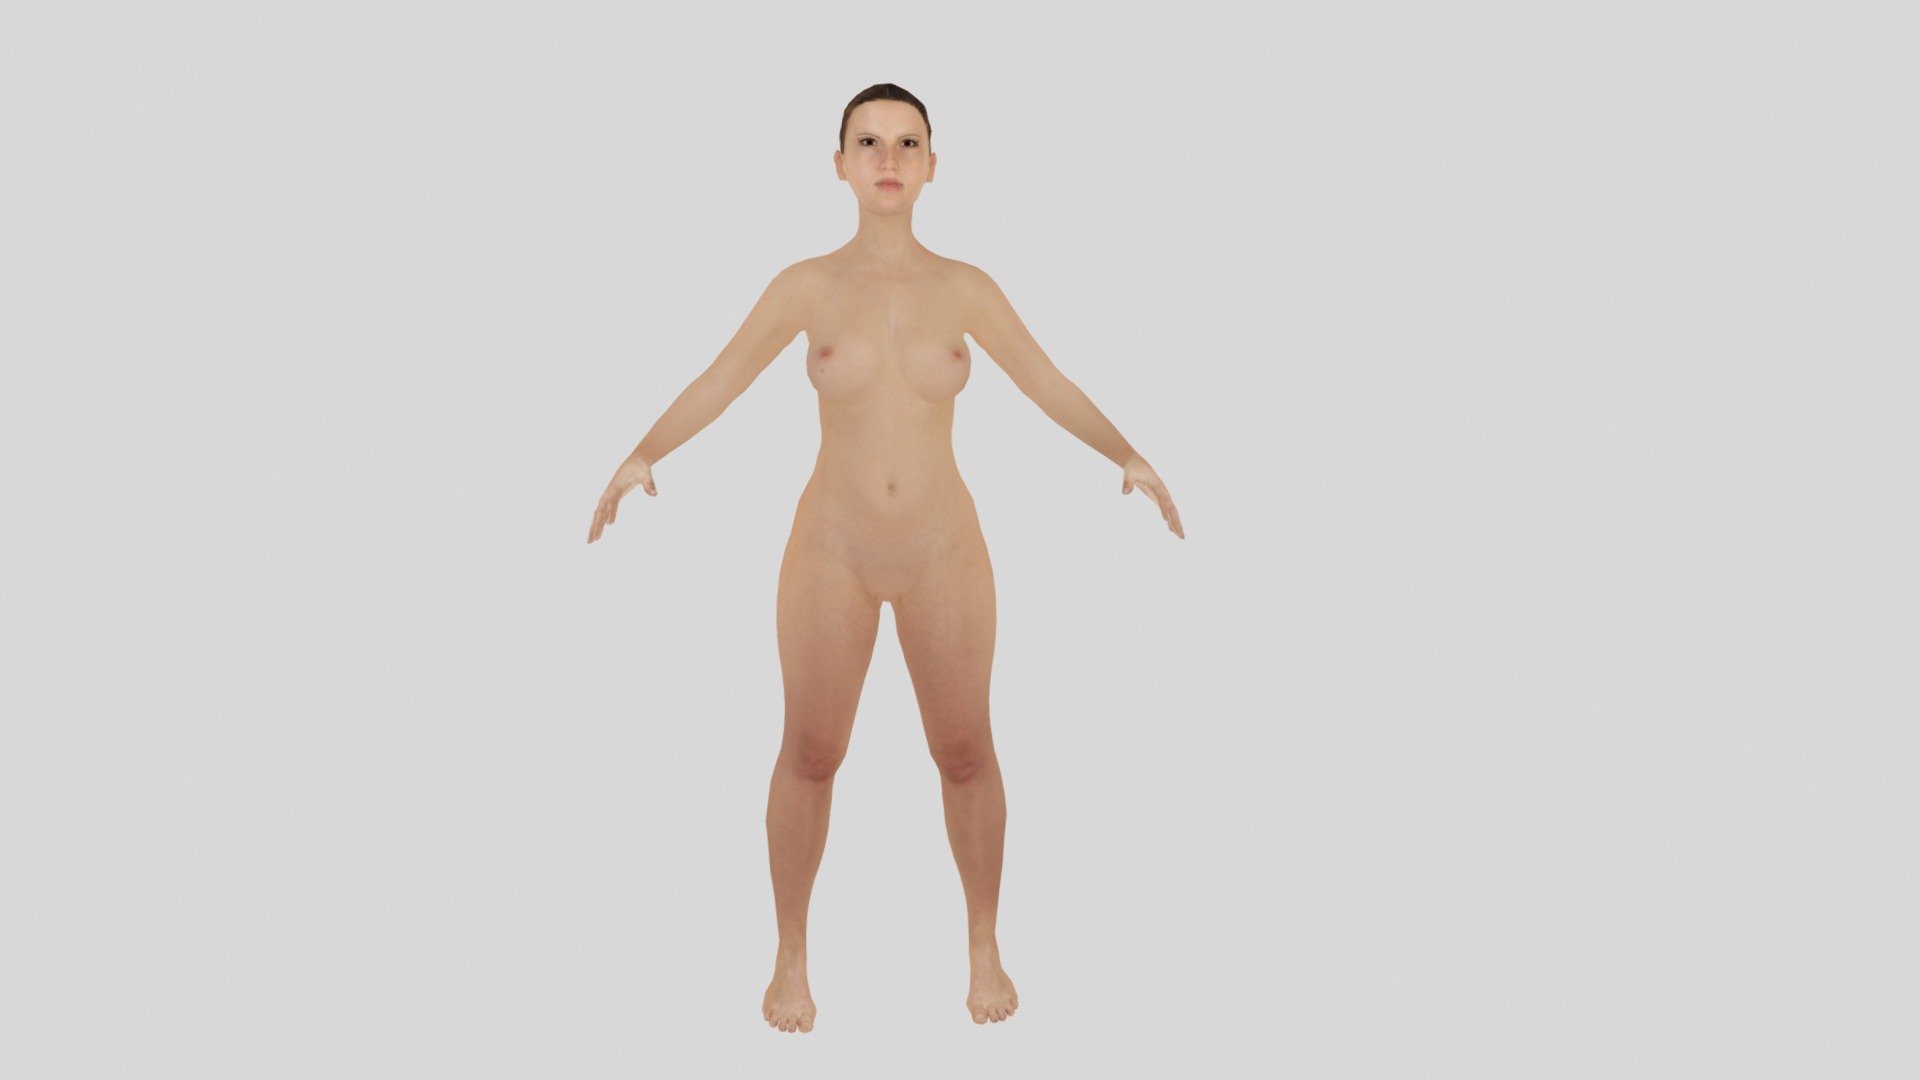 The female character is textured has bones and is ready for animation. 
A good base mesh allows you to save time with good proportions, clean topology and clean paint weight. This model was designed for use as a real-time asset in a videogame or simulation. This model is suitable for use in broadcast, high-res film , advertising, design visualization, forensic presentation,etc. Advanced Render . No plugins. It is rigged, and texture. The texture includes that of the eyes, eyelashes, eyebrows, hair, body, tongue, teeth. Ready for animation. You can easily edit the model for your projects. It is ready to use, just put it in your scene. 
Enviroments and lighting setups are not included, but let me know if you want them.
If you have any queston about format , contact me please.
Please don't forget to rate the model, for us it is very important :)
Total number of polygons: 20608 3d model